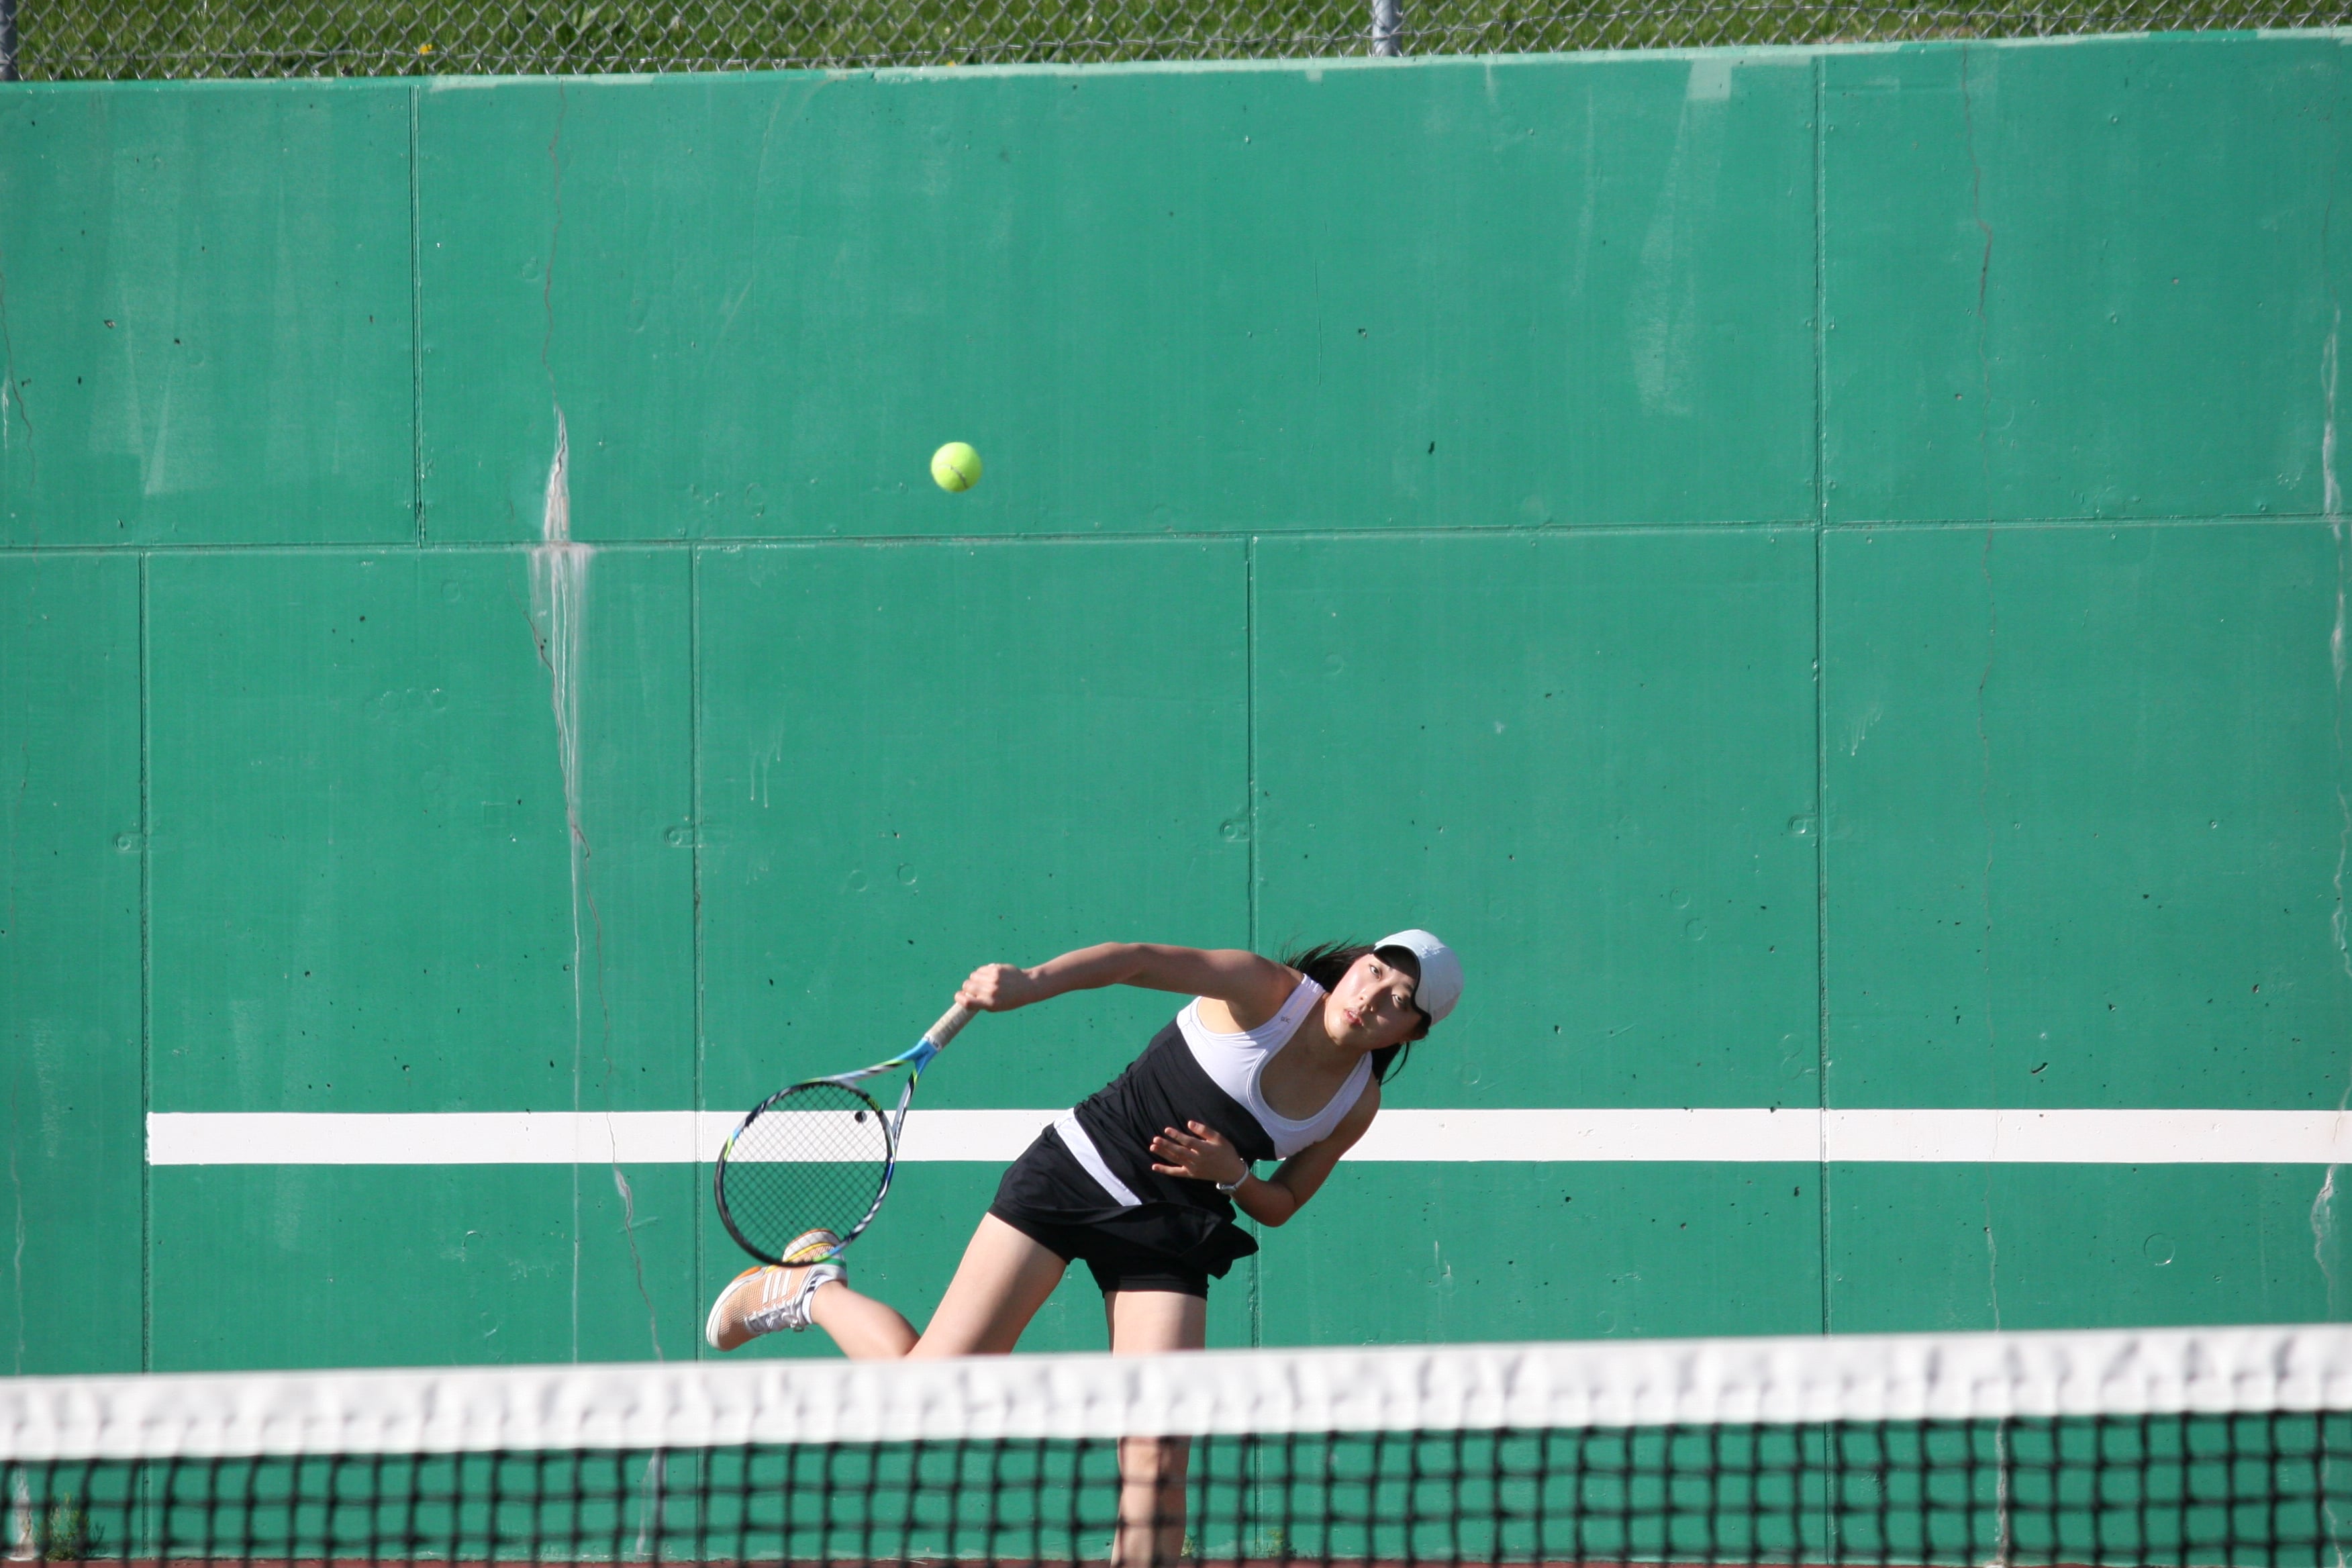 Esther Kwon hits the tennis ball at the right angle for a point.